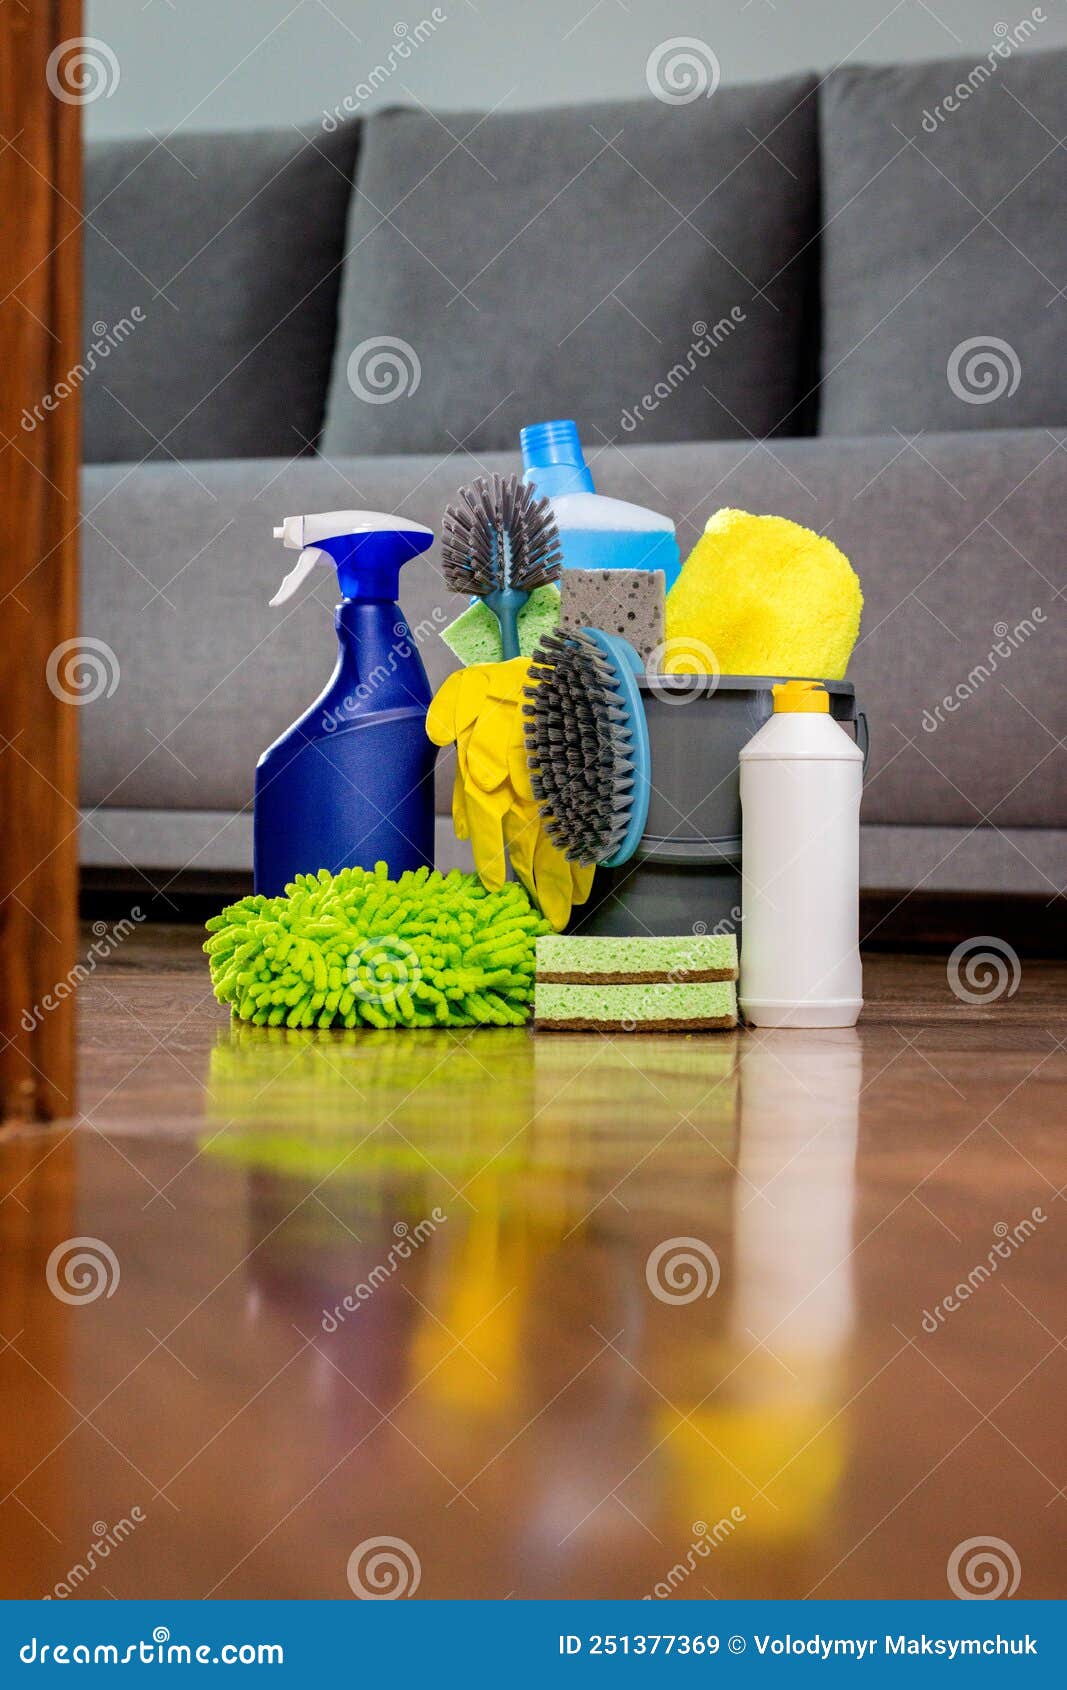 https://thumbs.dreamstime.com/z/household-cleaning-products-rags-reflection-floor-chemical-liquids-maintaining-cleanliness-251377369.jpg